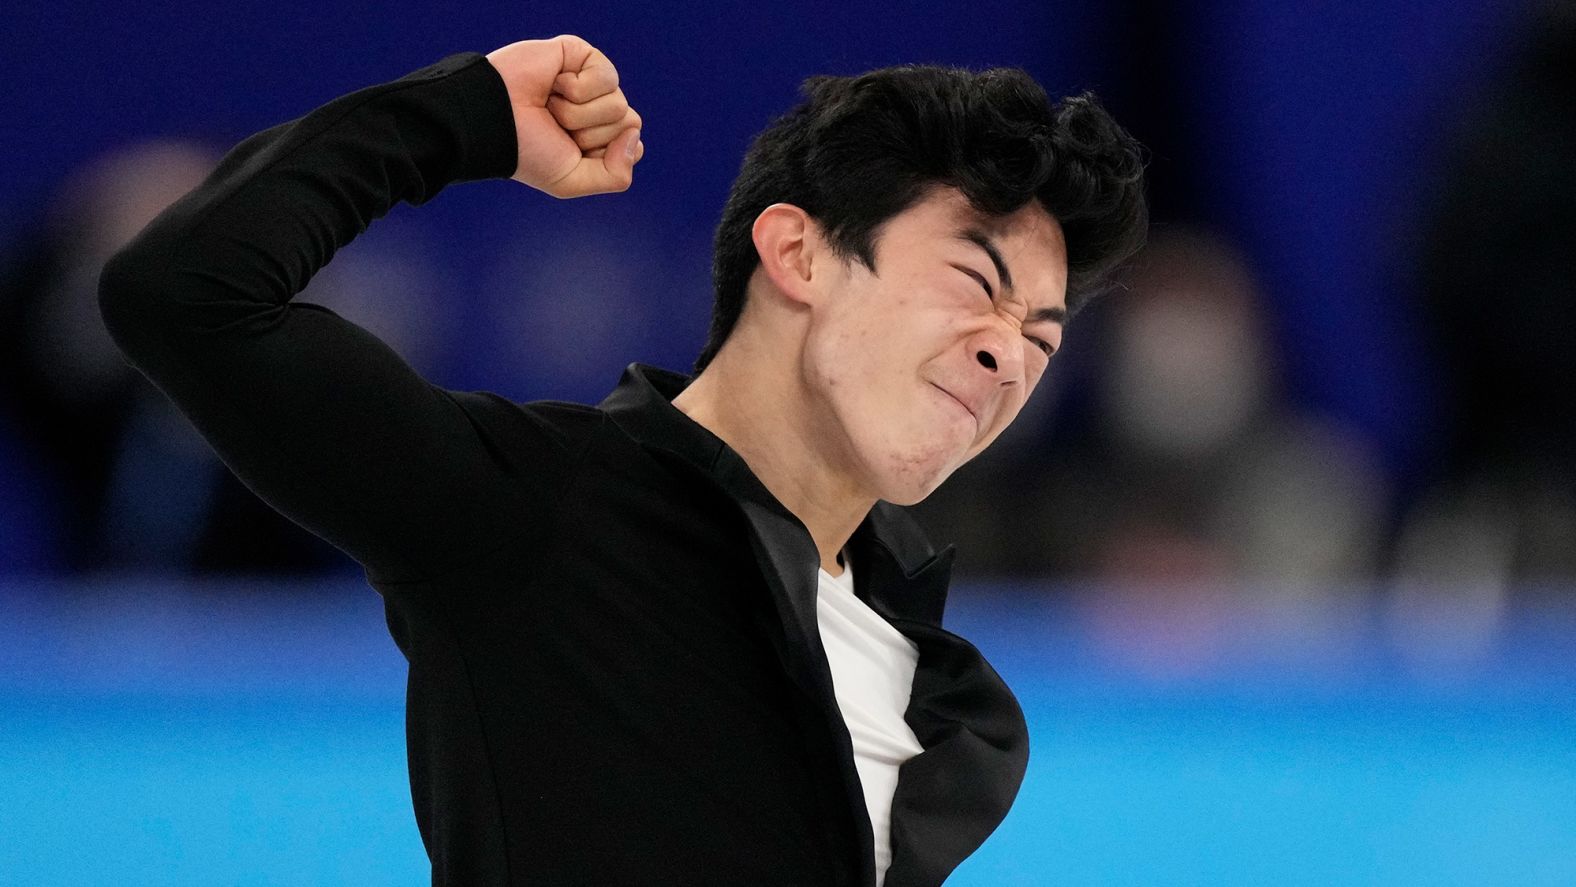 American figure skater Nathan Chen reacts after his short program on February 8. He <a href="index.php?page=&url=https%3A%2F%2Fwww.cnn.com%2Fworld%2Flive-news%2Fbeijing-winter-olympics-02-08-22-spt%2Fh_0da6fbe2c0fbccb3c8ad1412db9fdedb" target="_blank">set a new world record</a> with a score of 113.97.